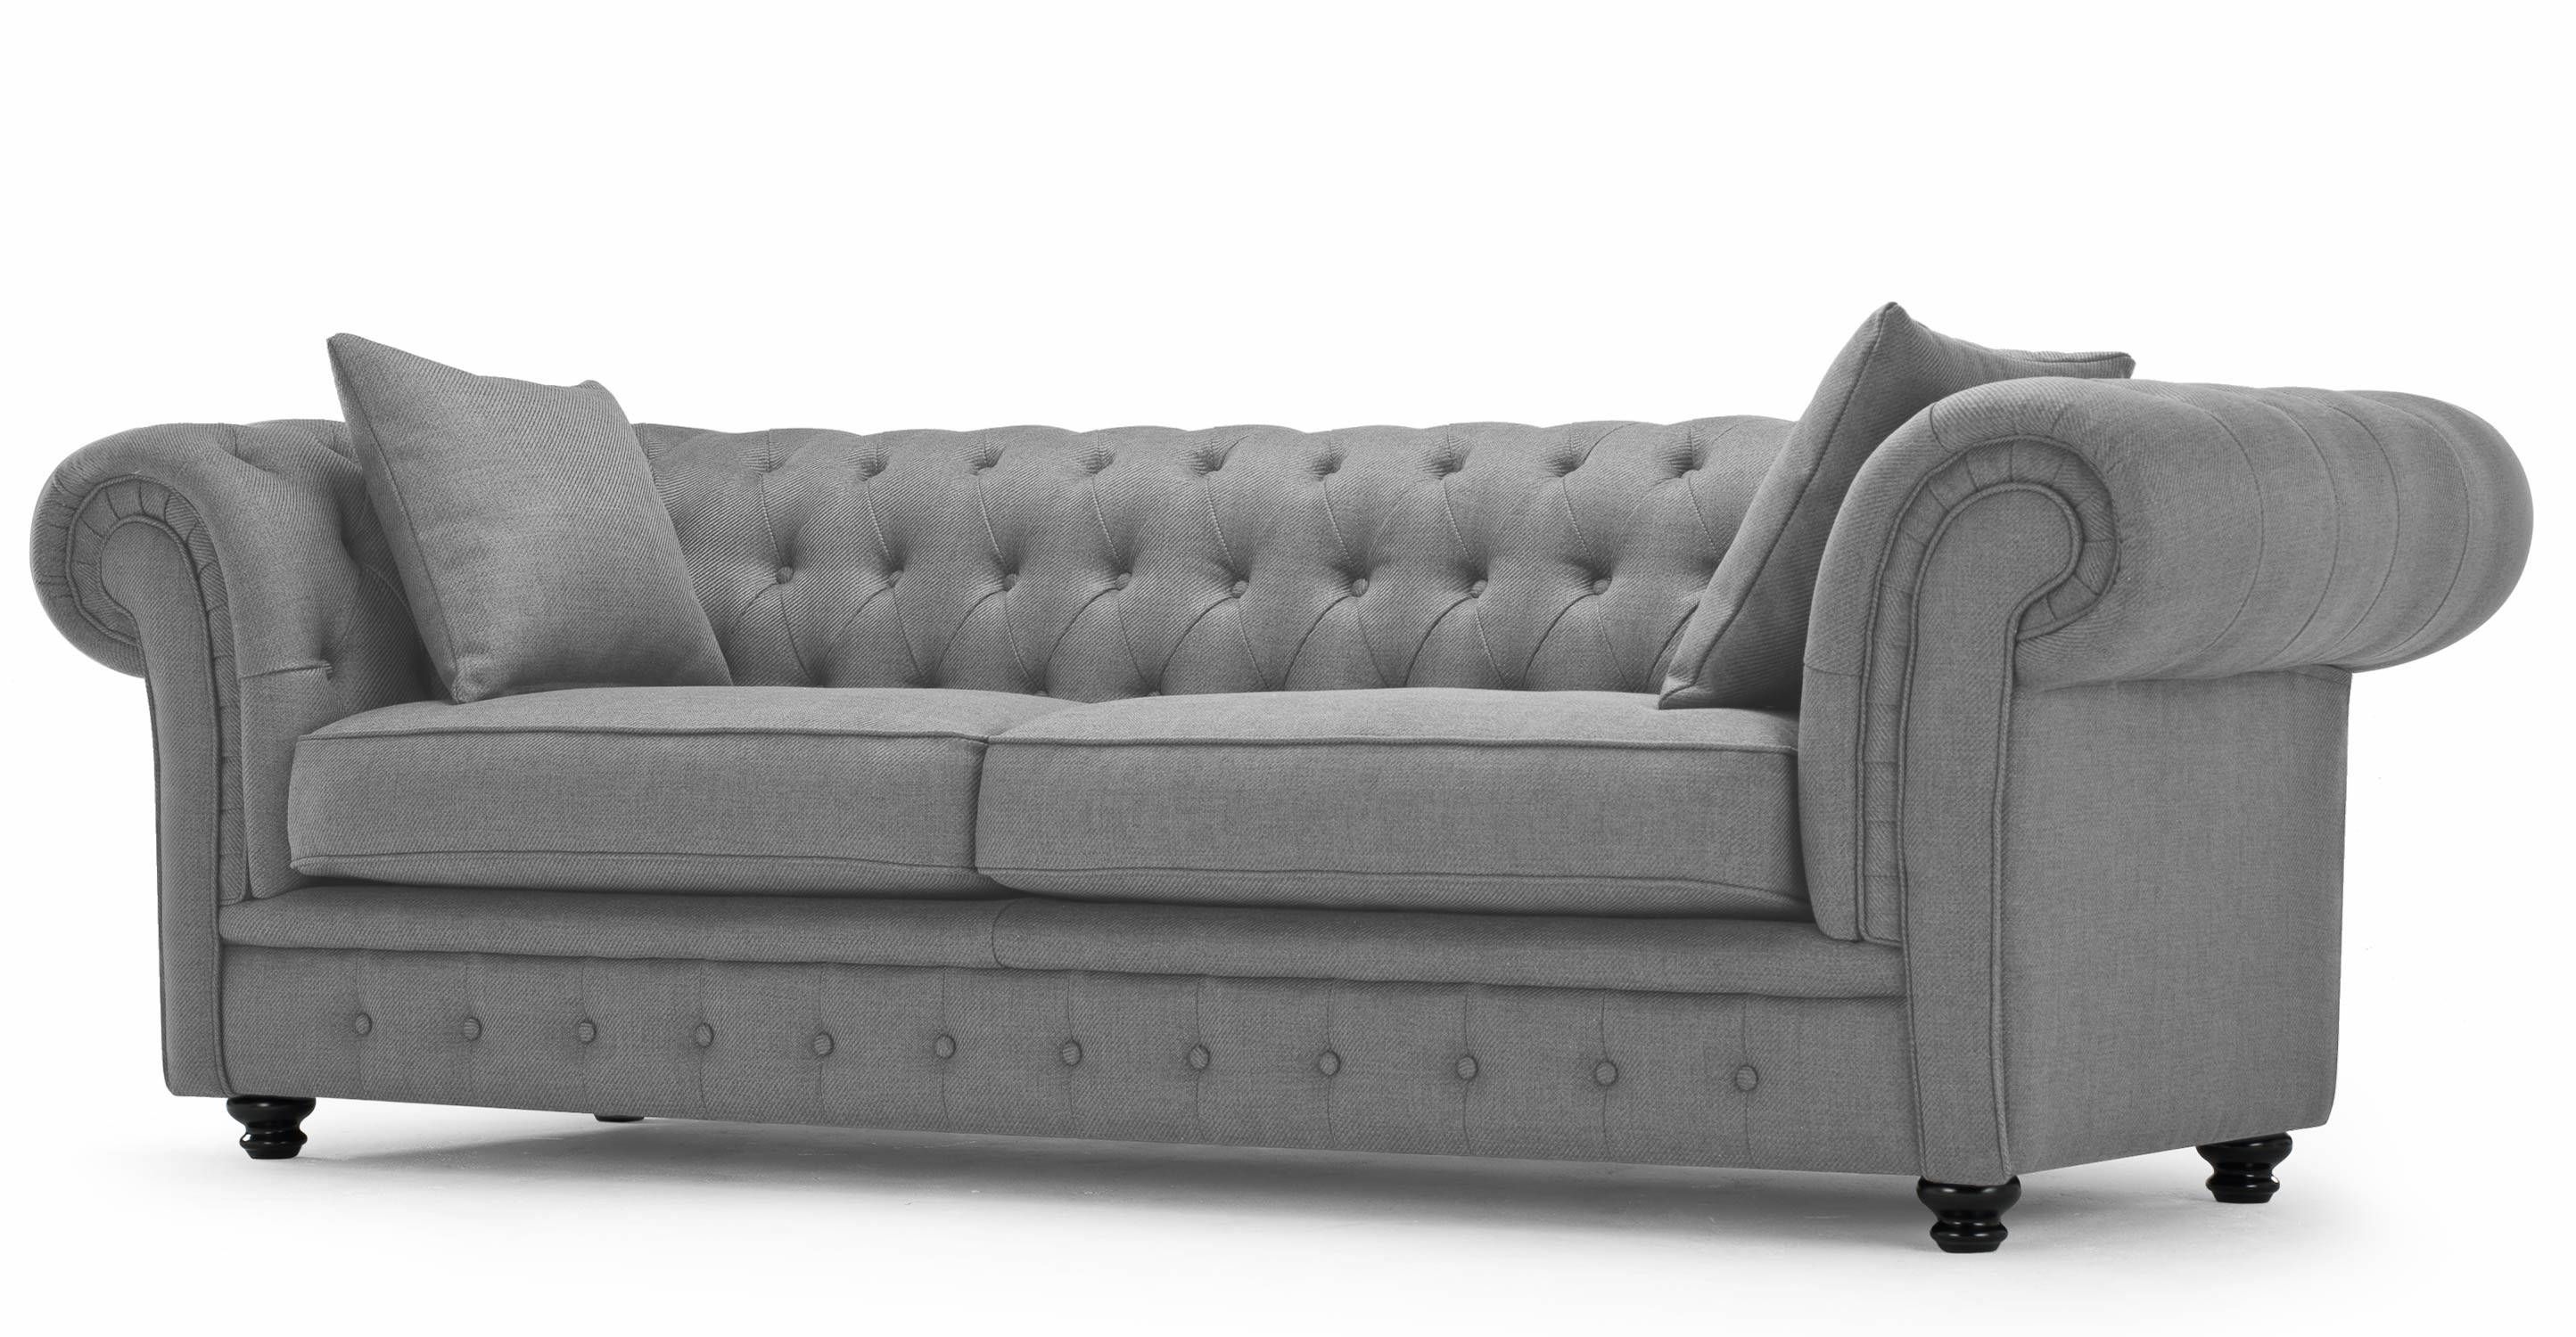 Trend Small Grey Couch 82 About Remodel Sofas And Couches Ideas With Regard To Small Grey Sofas (View 13 of 15)